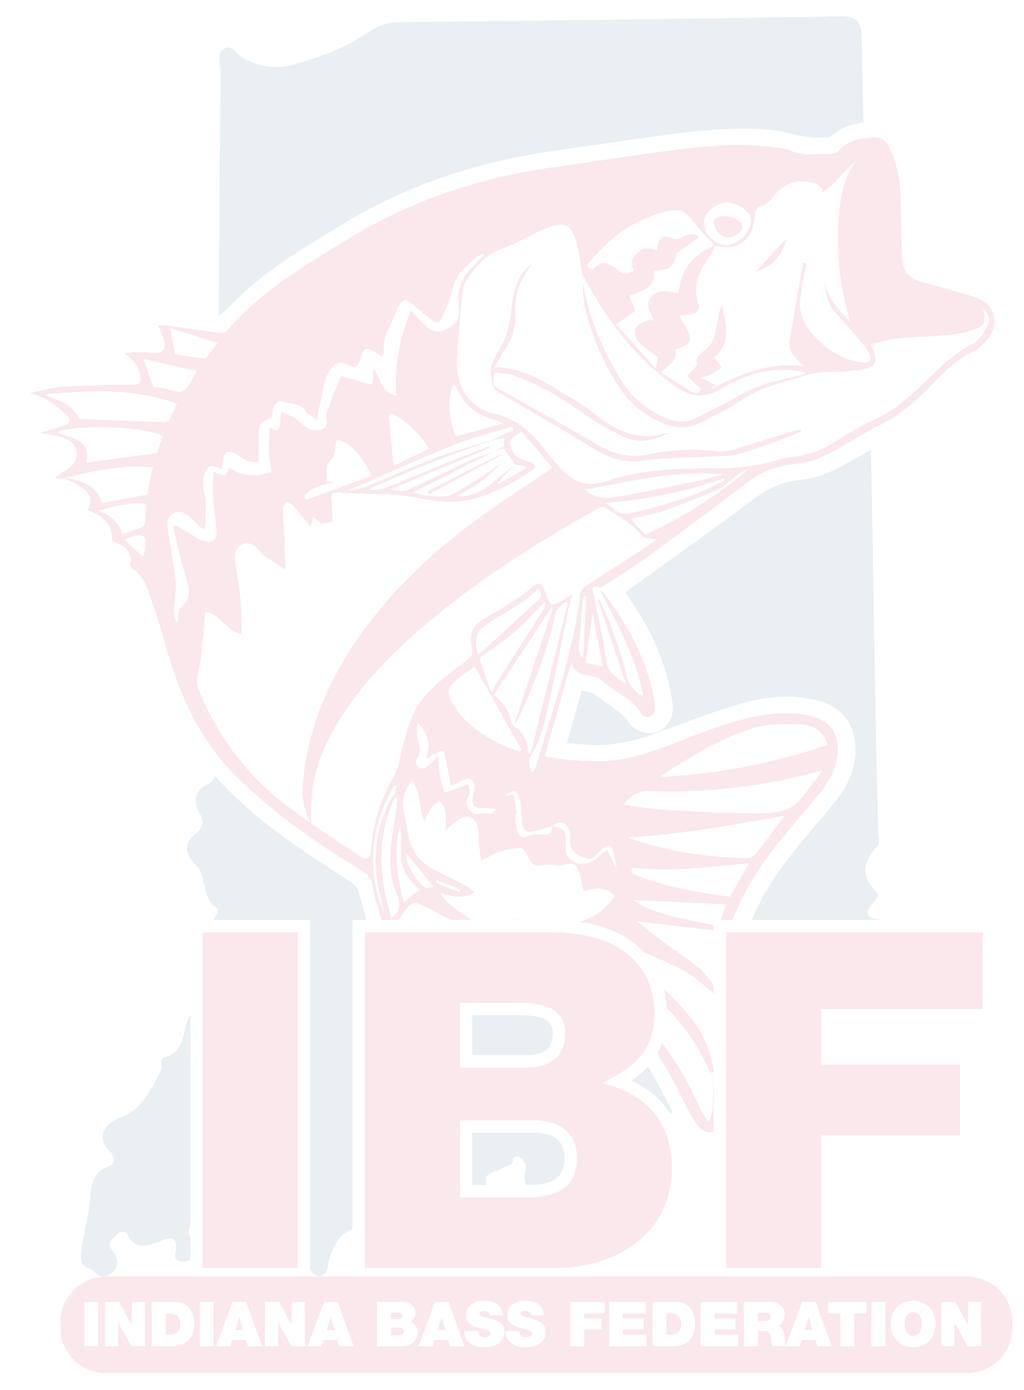 Small enough to care Big enough to get you there IBF River Series $100 Entry Fee Angler & Co-Angler (Pay at Ramp or Online) Optional Big Bass - $20.00 per boat or $10.